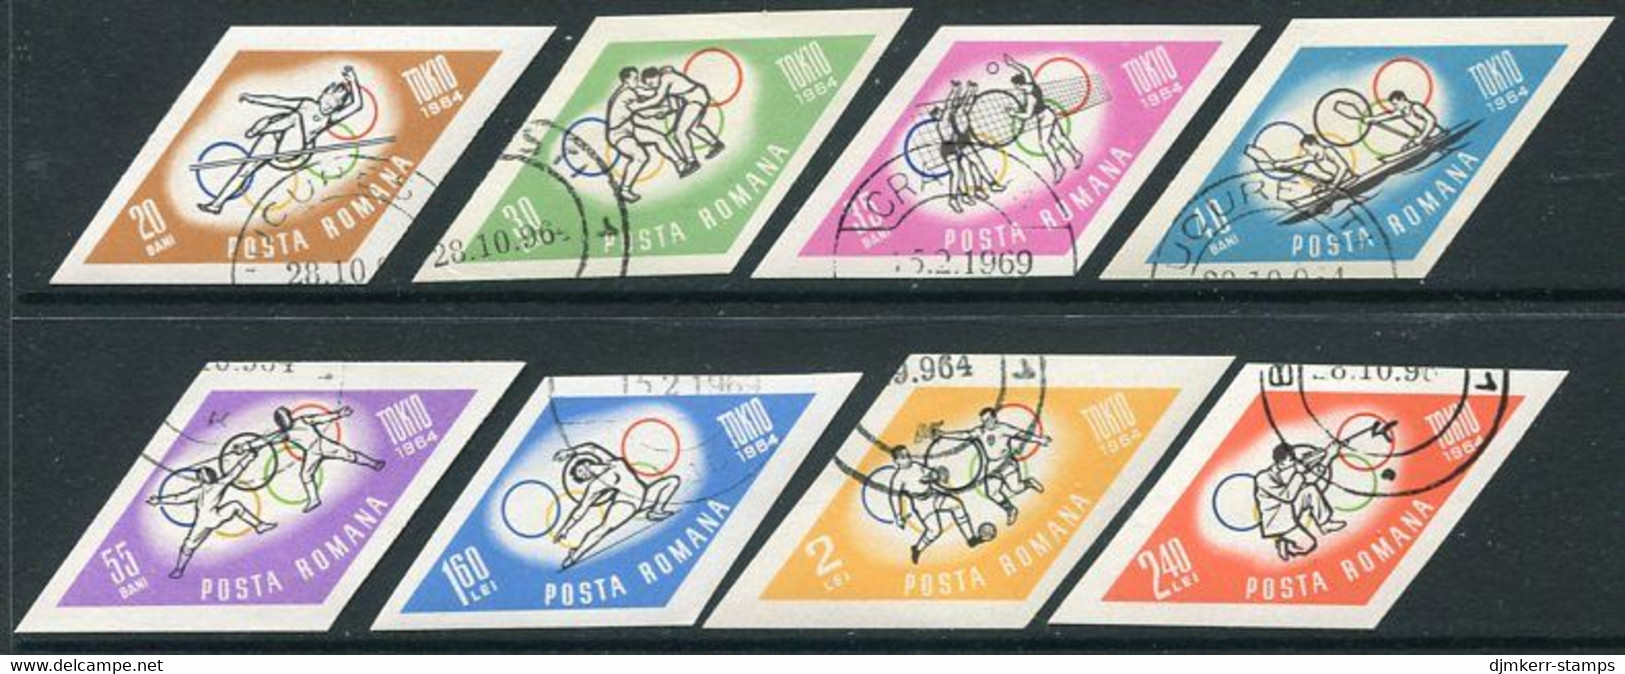 ROMANIA 1964 Tokyo Olympic Games Imperforate Used.  Michel 2317-24 - Usado